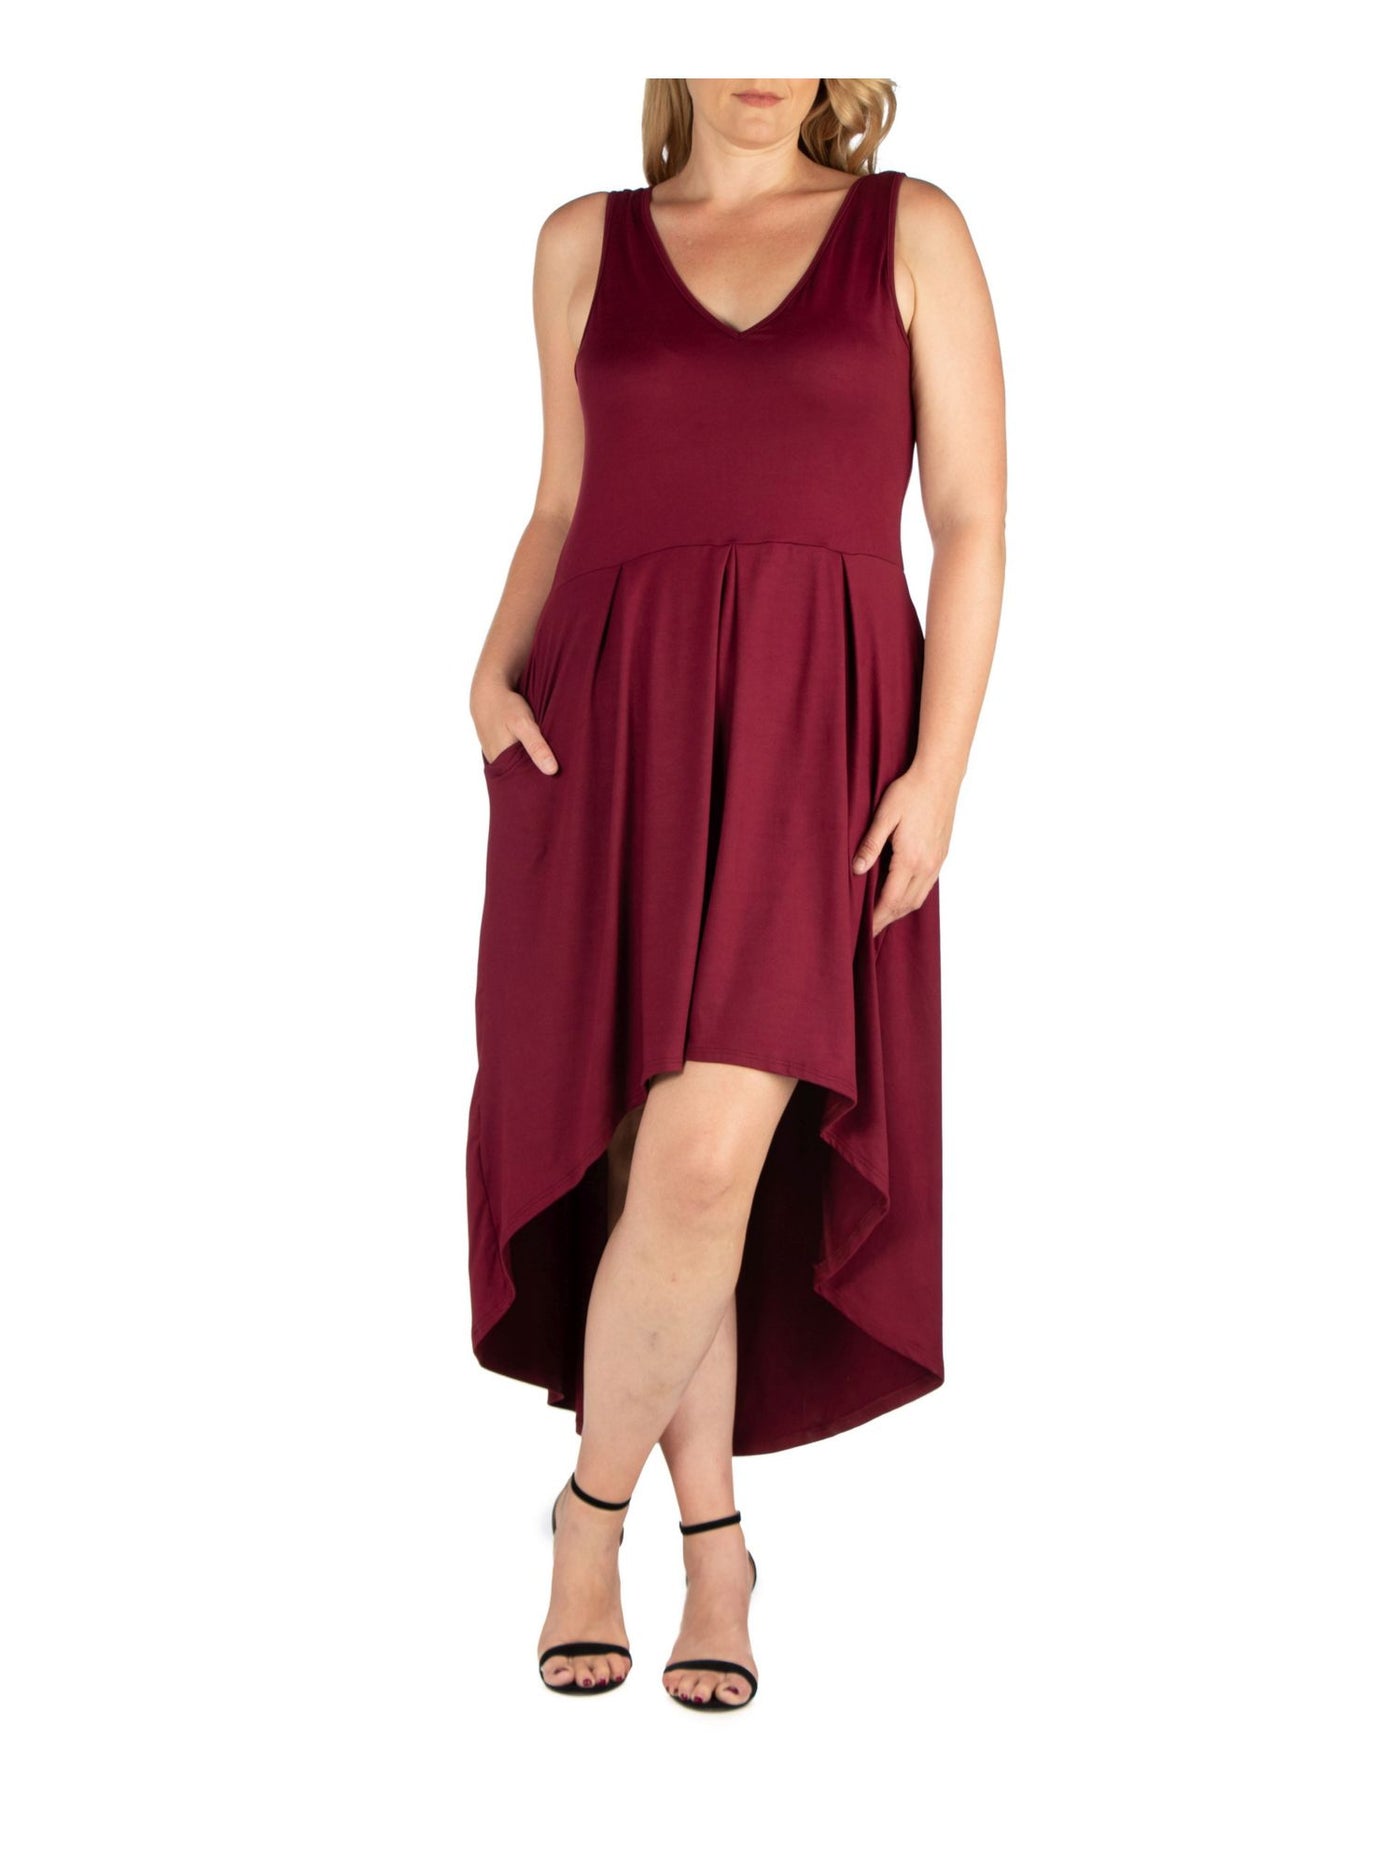 24 SEVEN COMFORT Womens Burgundy Pocketed Pleated Waist Pullover Sleeveless V Neck Tea-Length Party Hi-Lo Dress Plus 1X